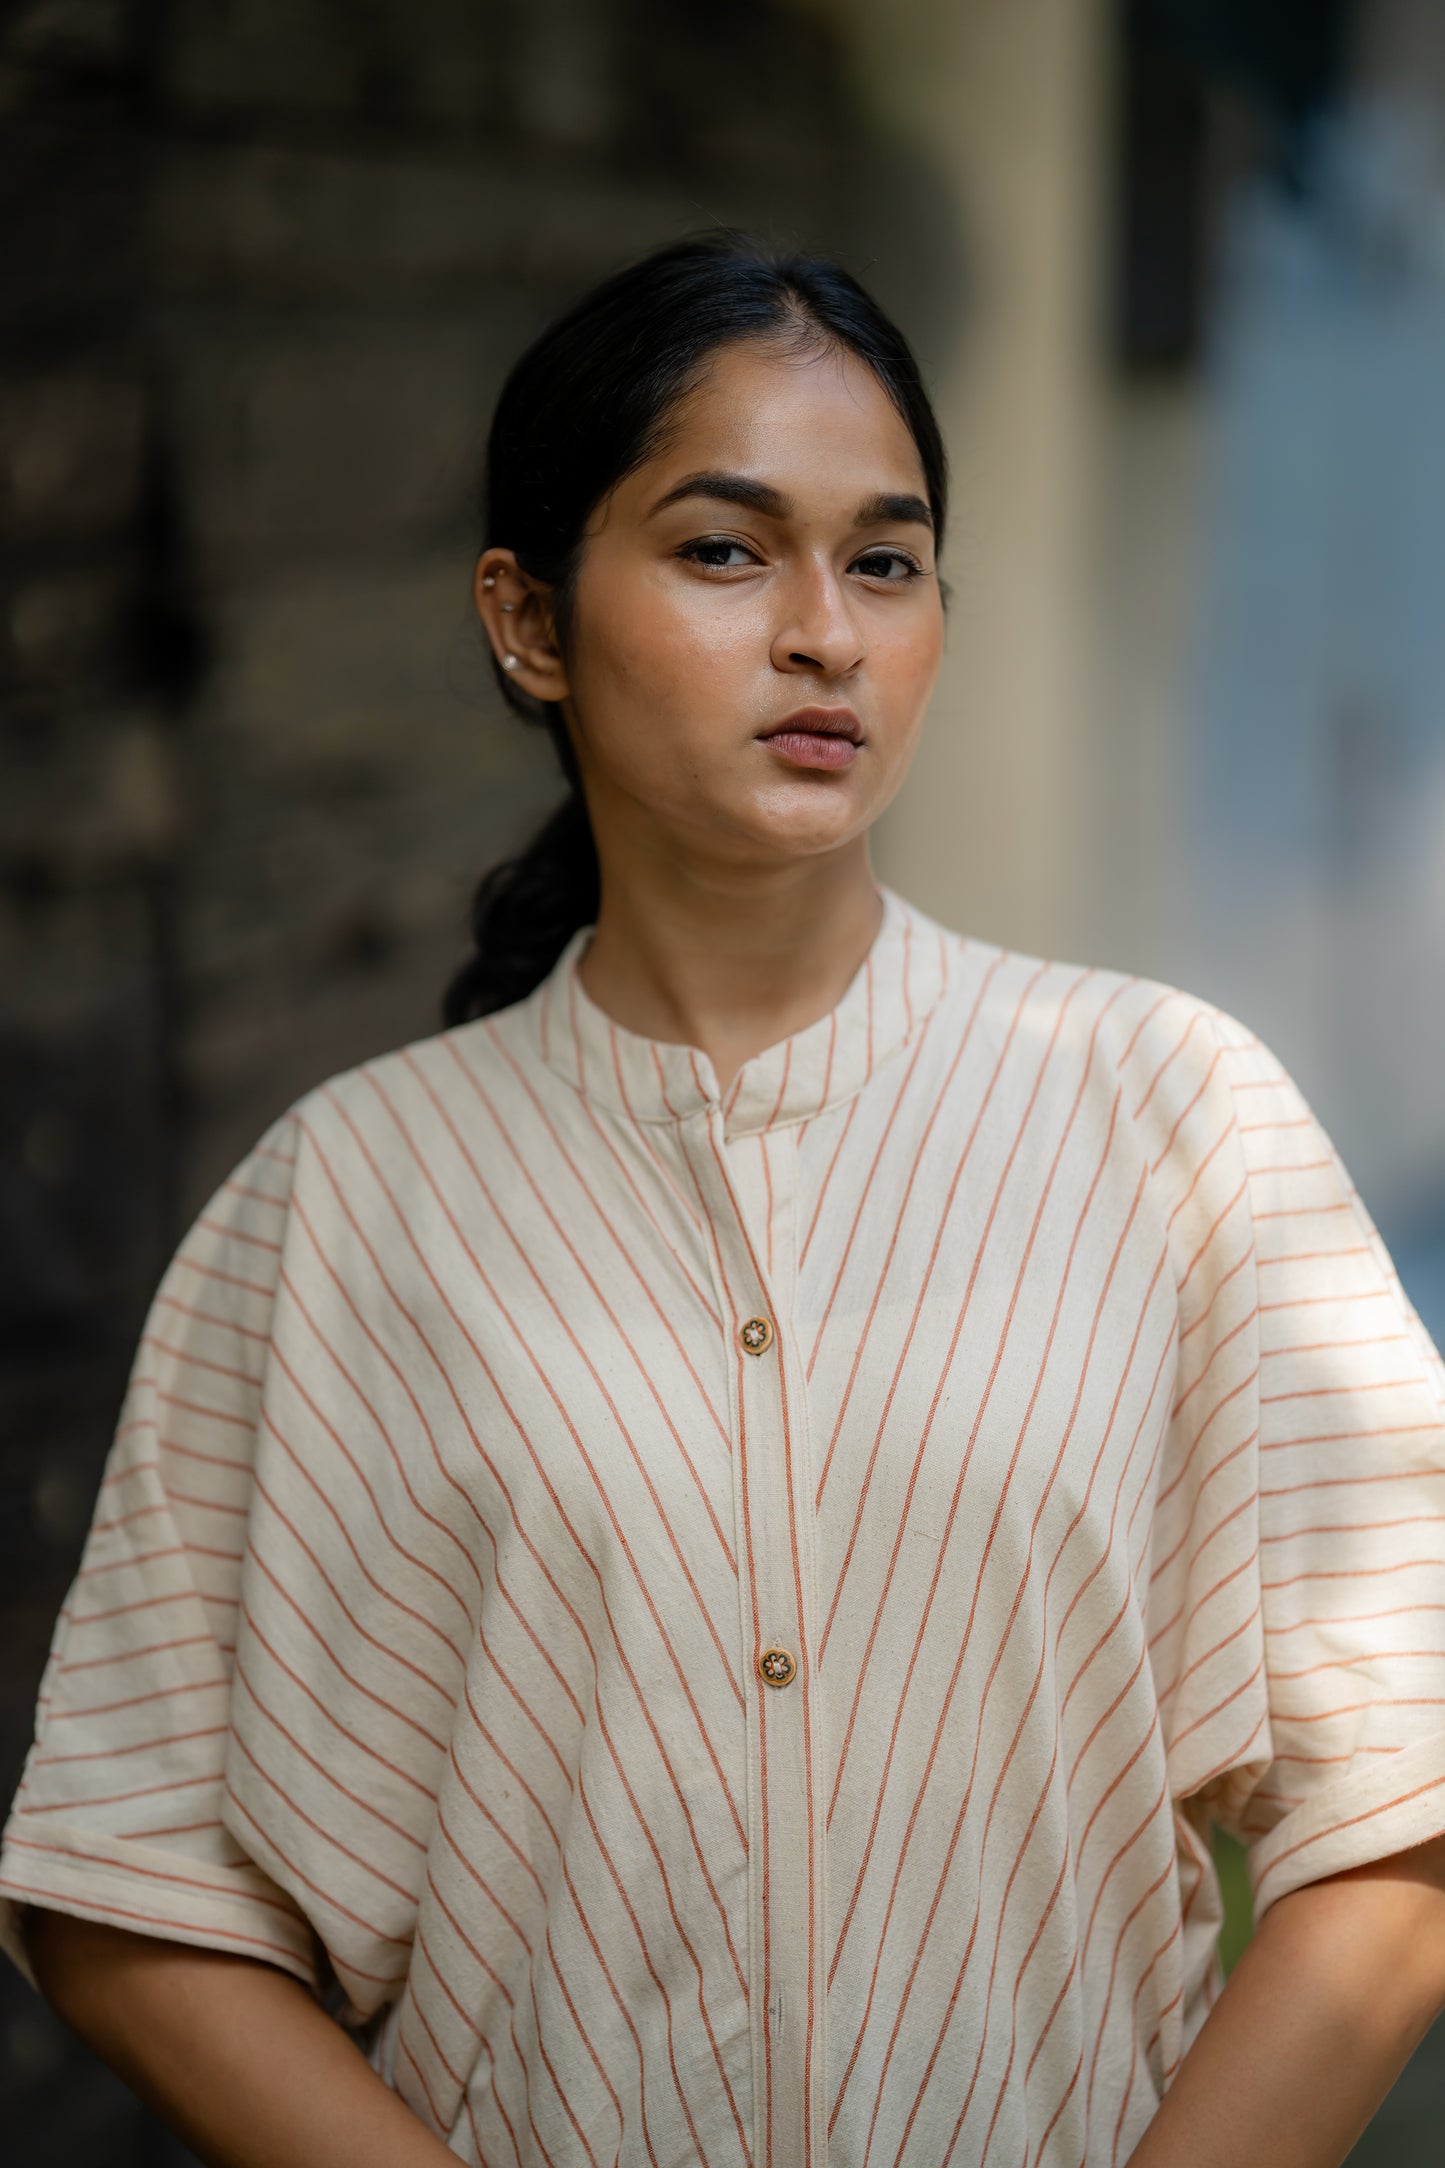 Relaxed Fit Striped Shirt with Kimono Sleeves at Kamakhyaa by Krushnachuda. This item is Casual Wear, Cream, Handloom Cotton, Natural Dye, Organic, Relaxed Fit, Shirts, Stripes